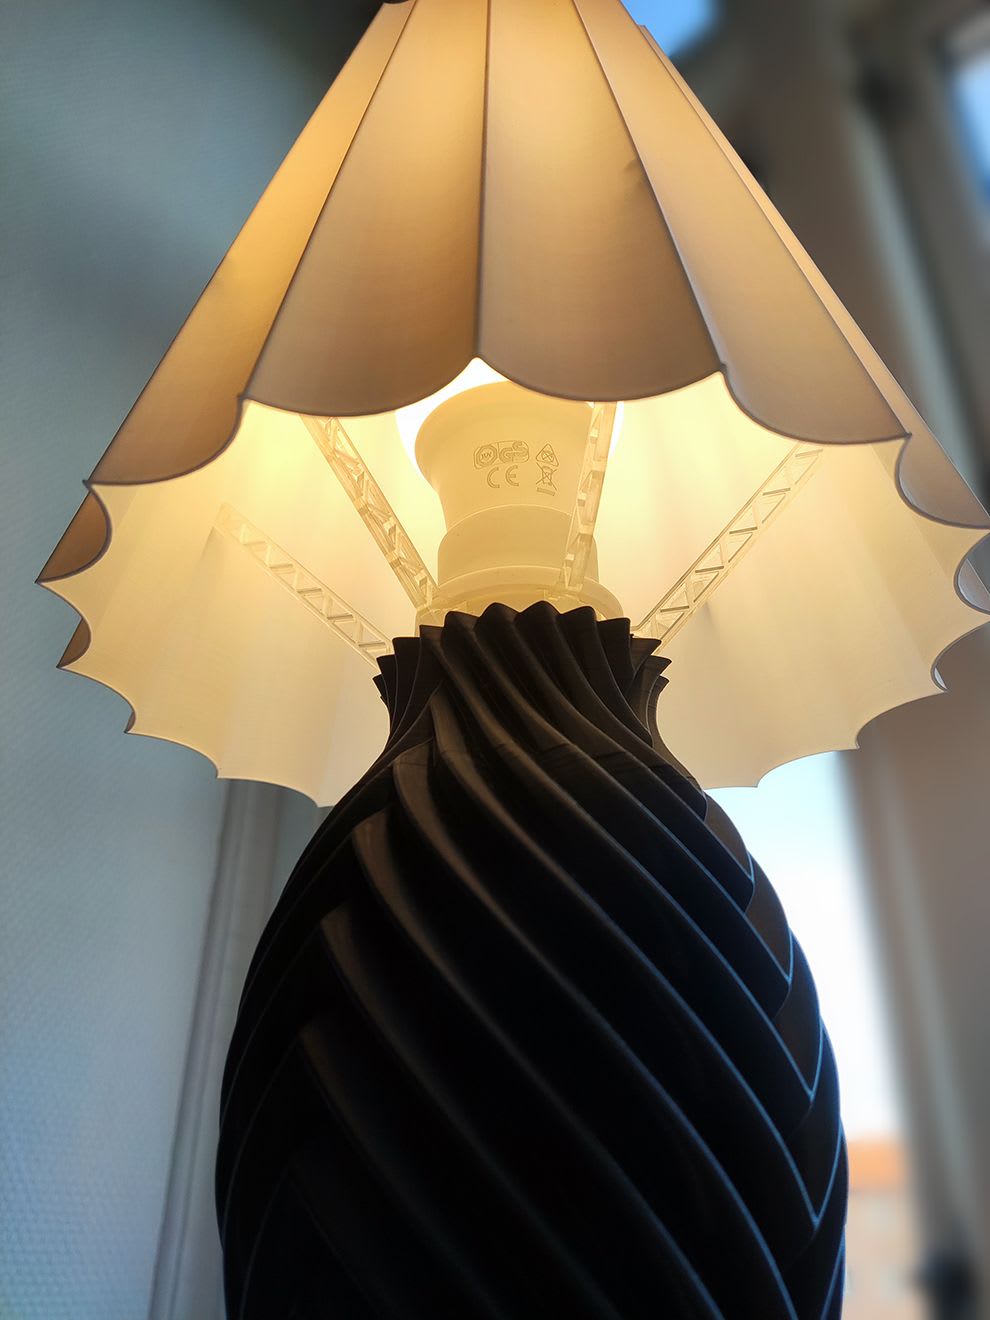 Introducing VAMP - the 3D printed table lamp